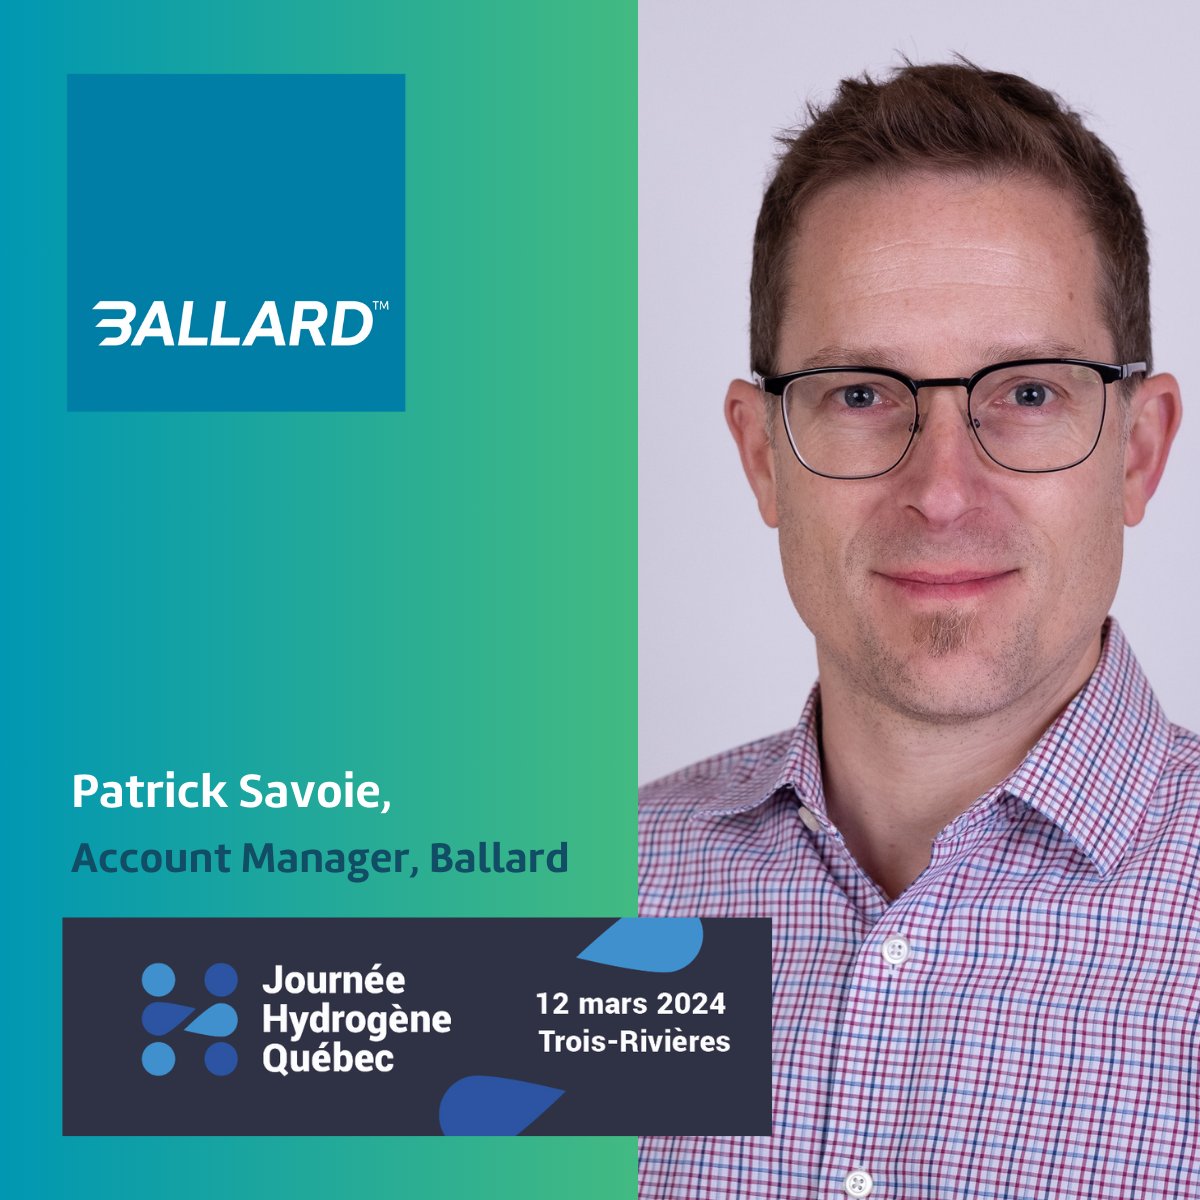 Join Patrick Savoie for the latest market insights in the #ZeroEmission Mobility and Stationary Power space at his upcoming presentation titled 'The Road to Decarbonizing: Mobility and Stationary', Journée Hydrogène Québec. Learn more: bit.ly/4c12iYV